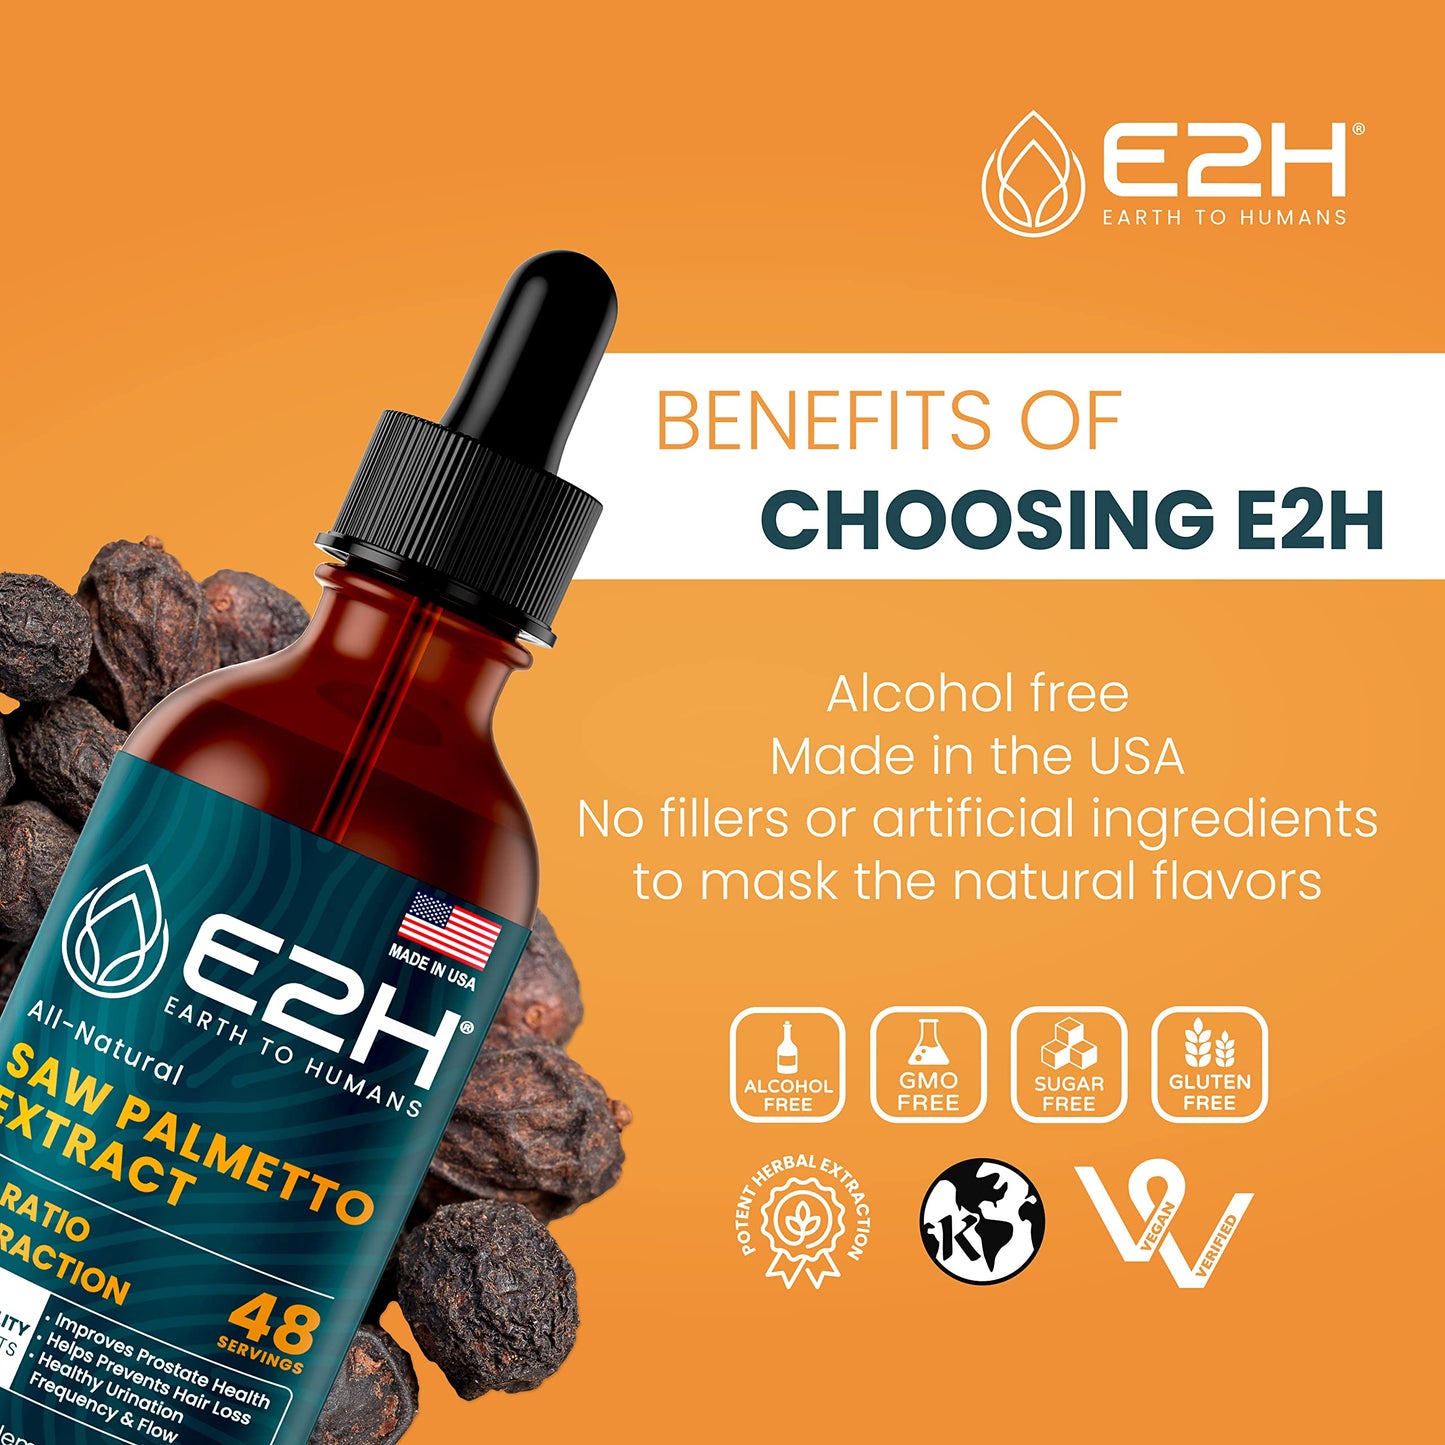 
                  
                    E2H Saw Palmetto Extract, All Natural Prostate Supplement for Men Promotes Urinary Function, Reproduction and Hair Growth - Alcohol-Free 1:4 Ratio Extraction, Vegan Friendly, Non-GMO (3 Bottles)
                  
                